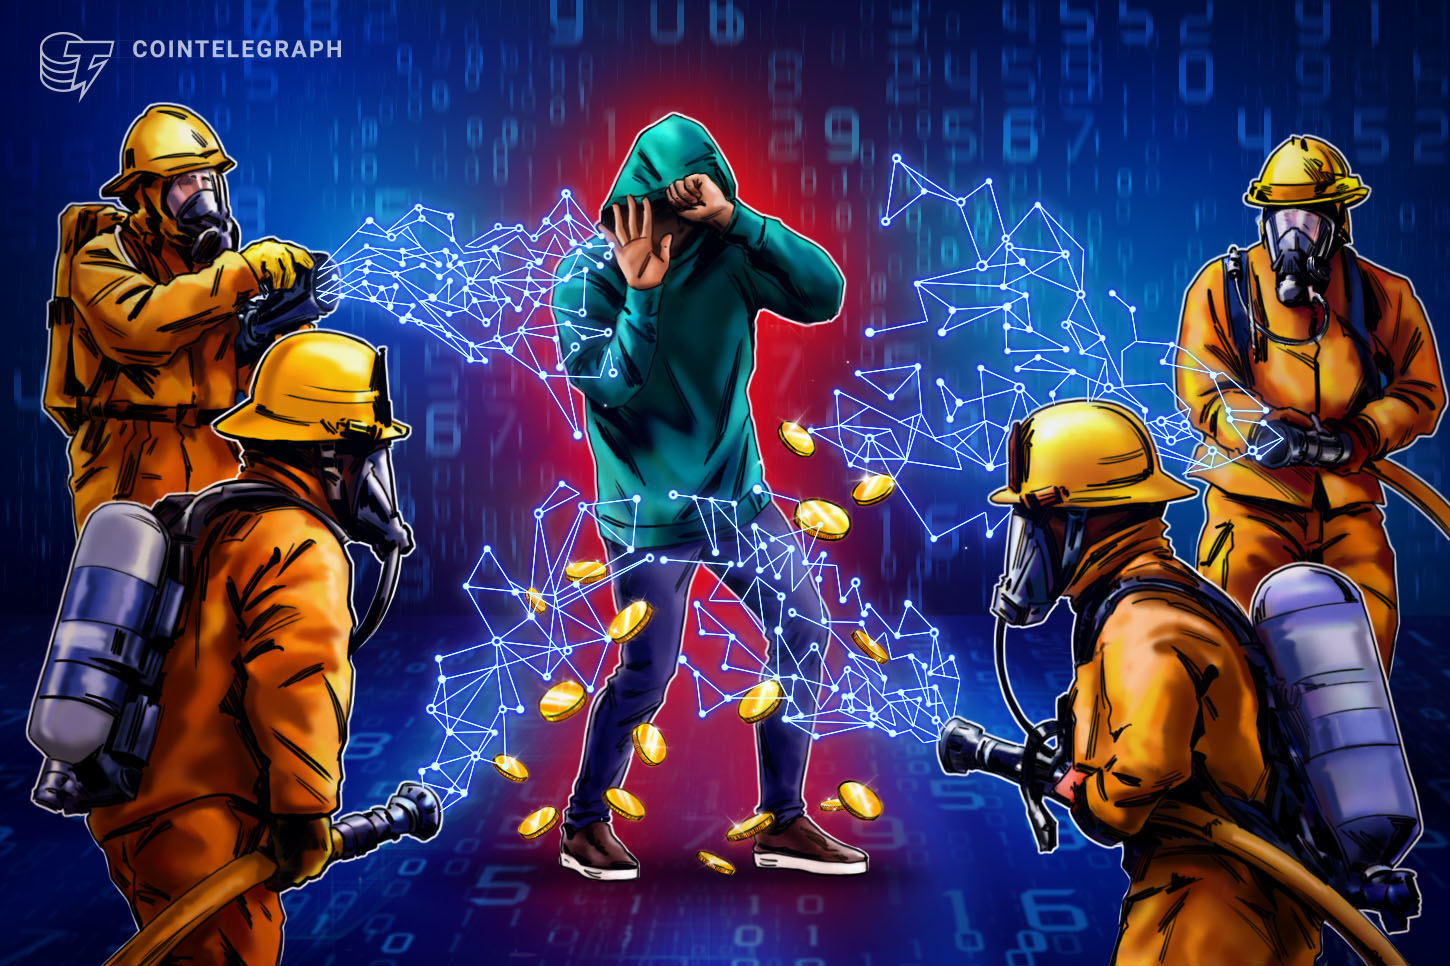 Binance, Huobi team up to recover $2.5M from Harmony One hackers